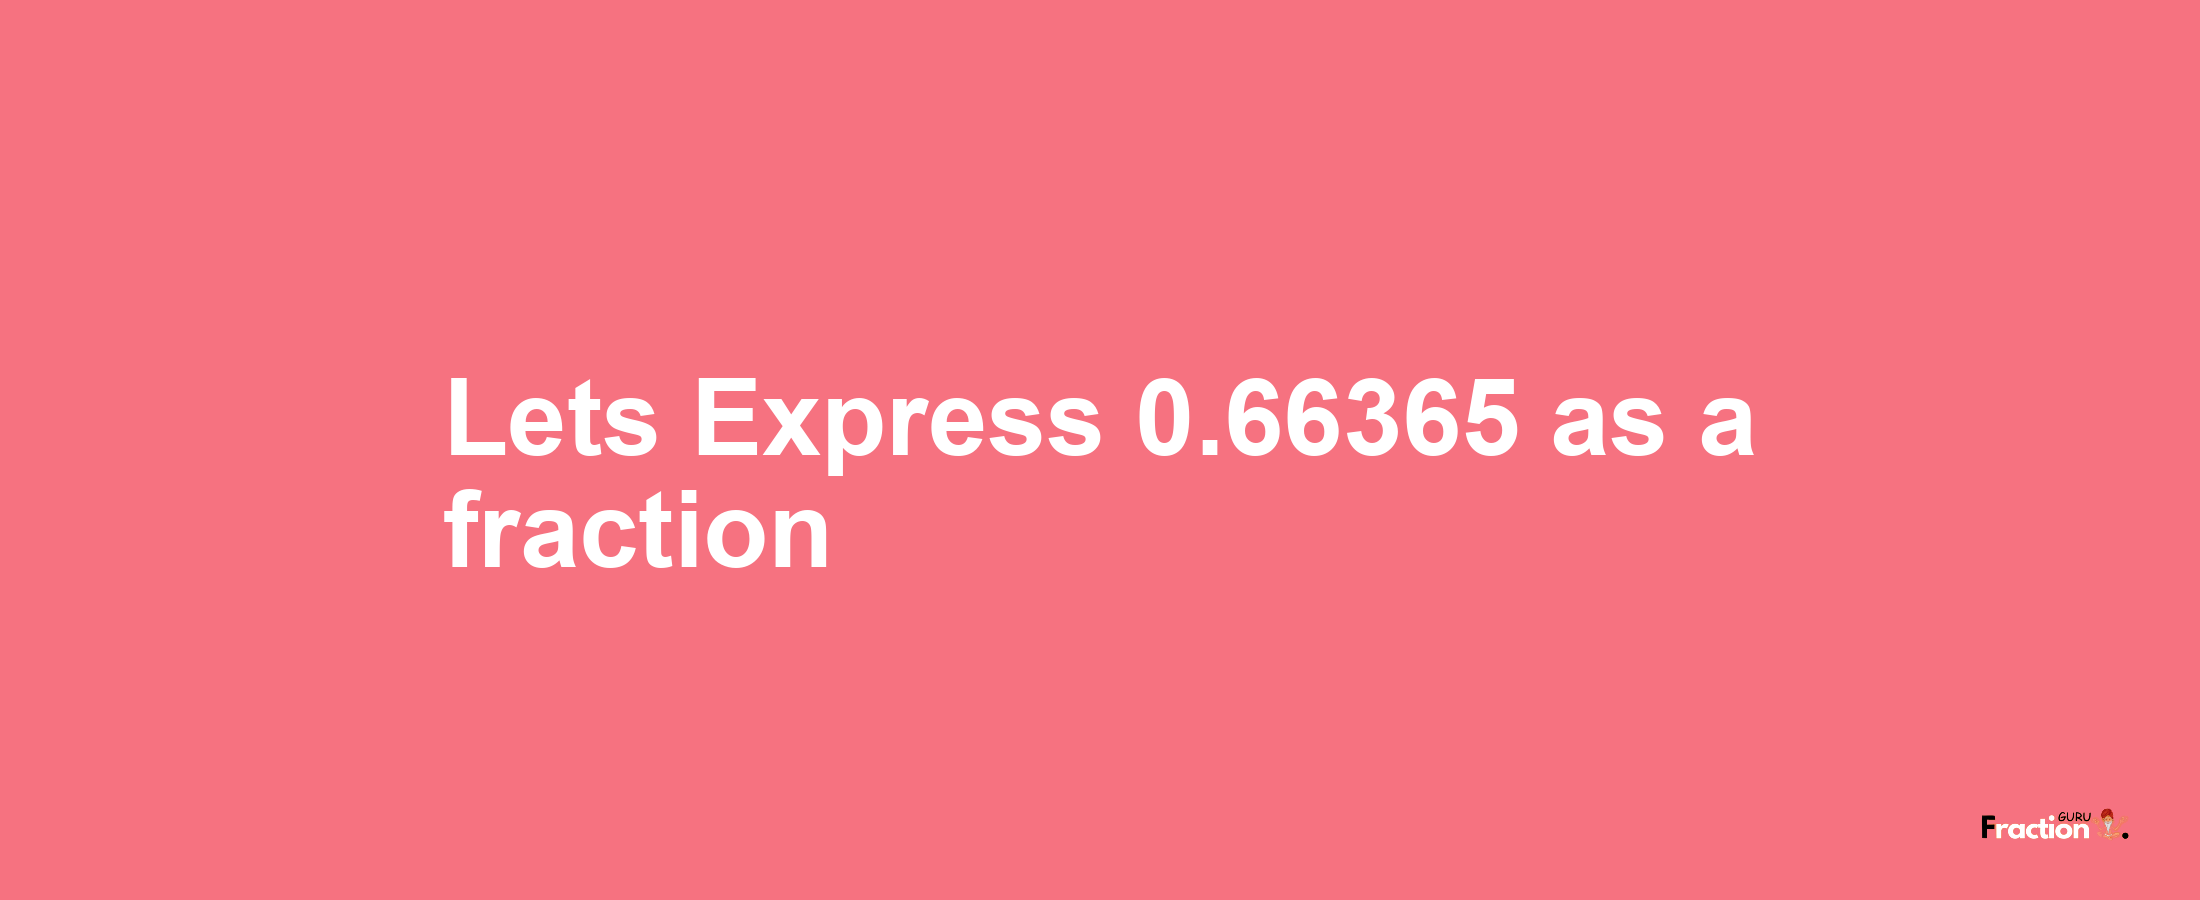 Lets Express 0.66365 as afraction